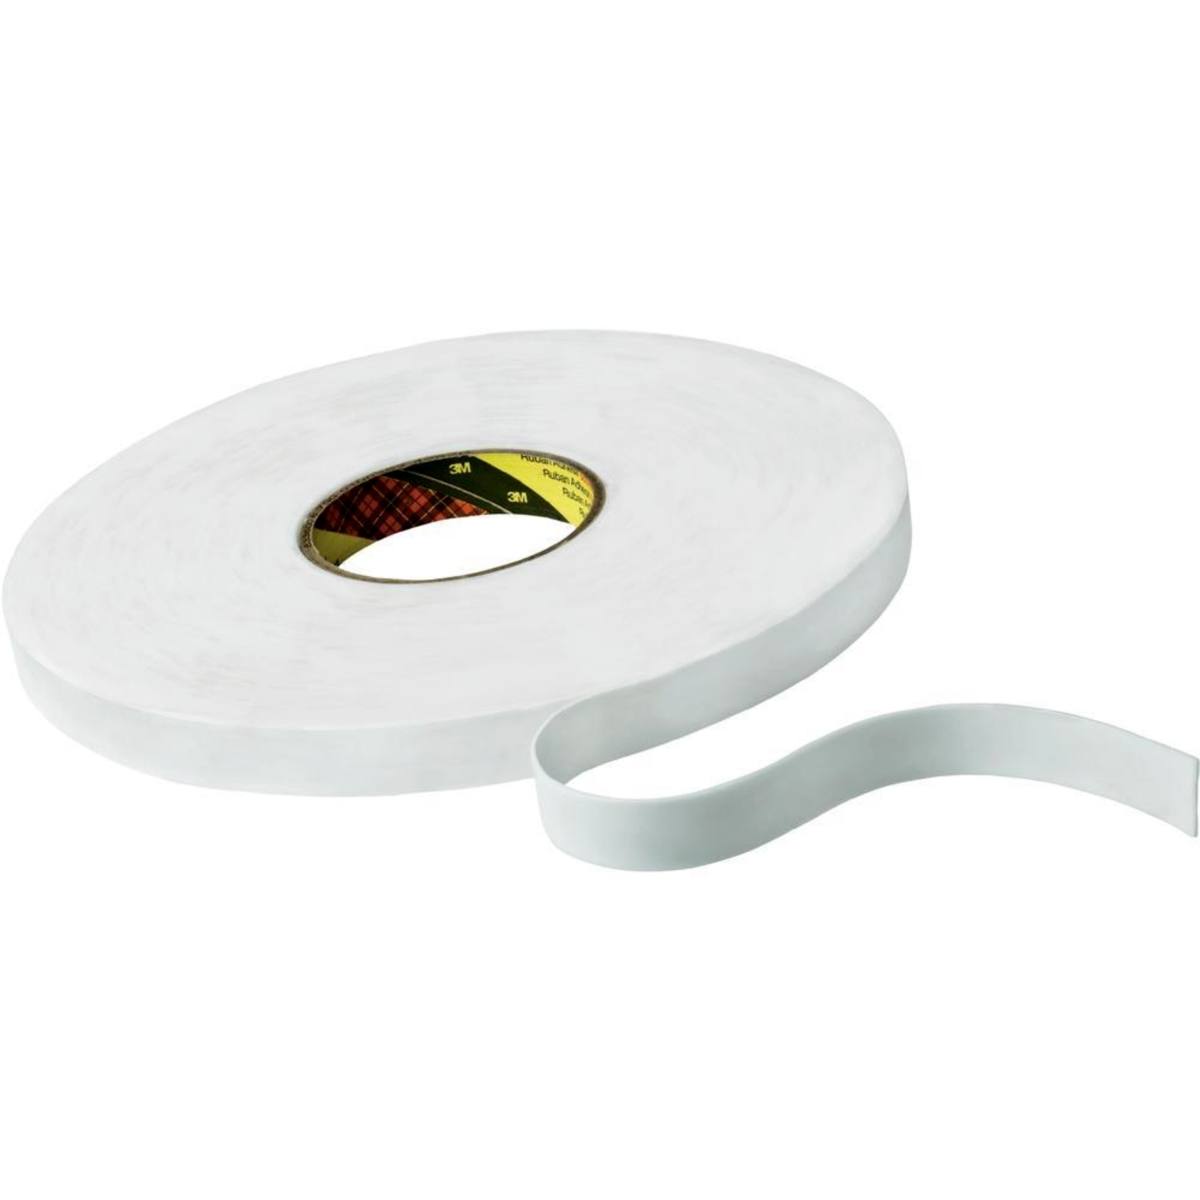 3M PE foam adhesive tape with acrylic adhesive 9546, white, 12 mm x 66 m, 1.1 mm